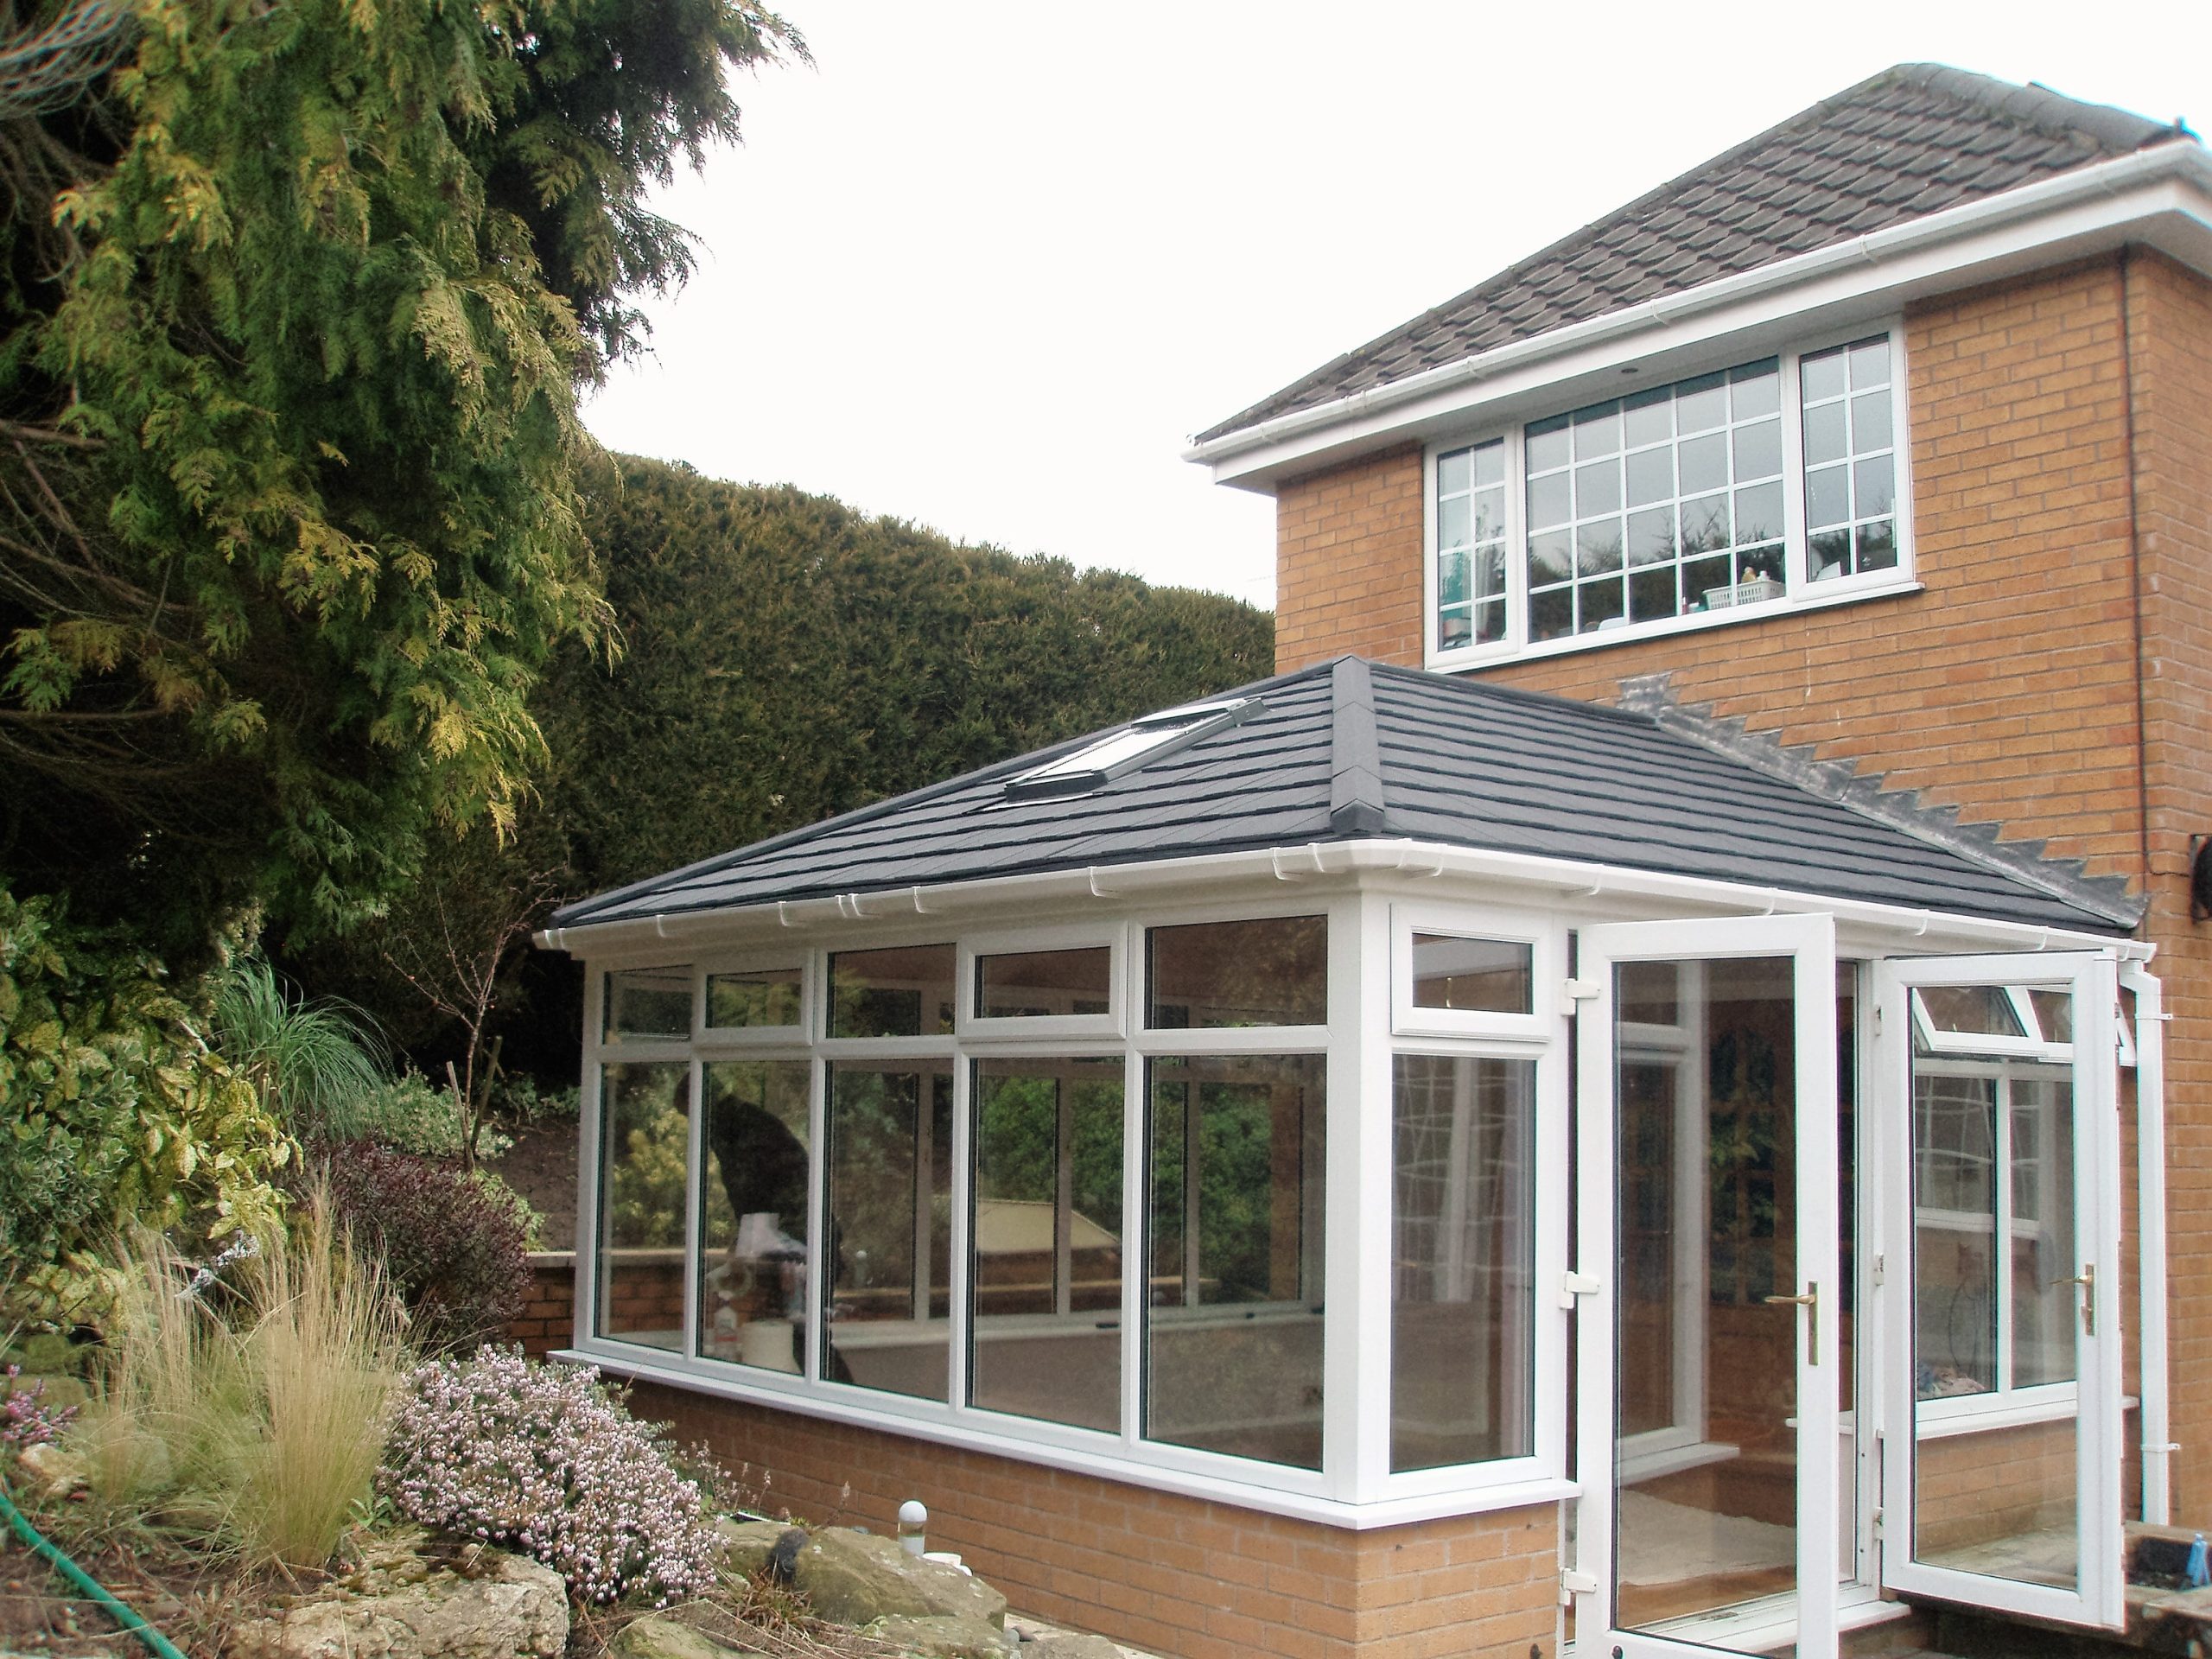 Harness the Sunshine: Summer Home Improvement Ideas in Leicester with Progress Windows